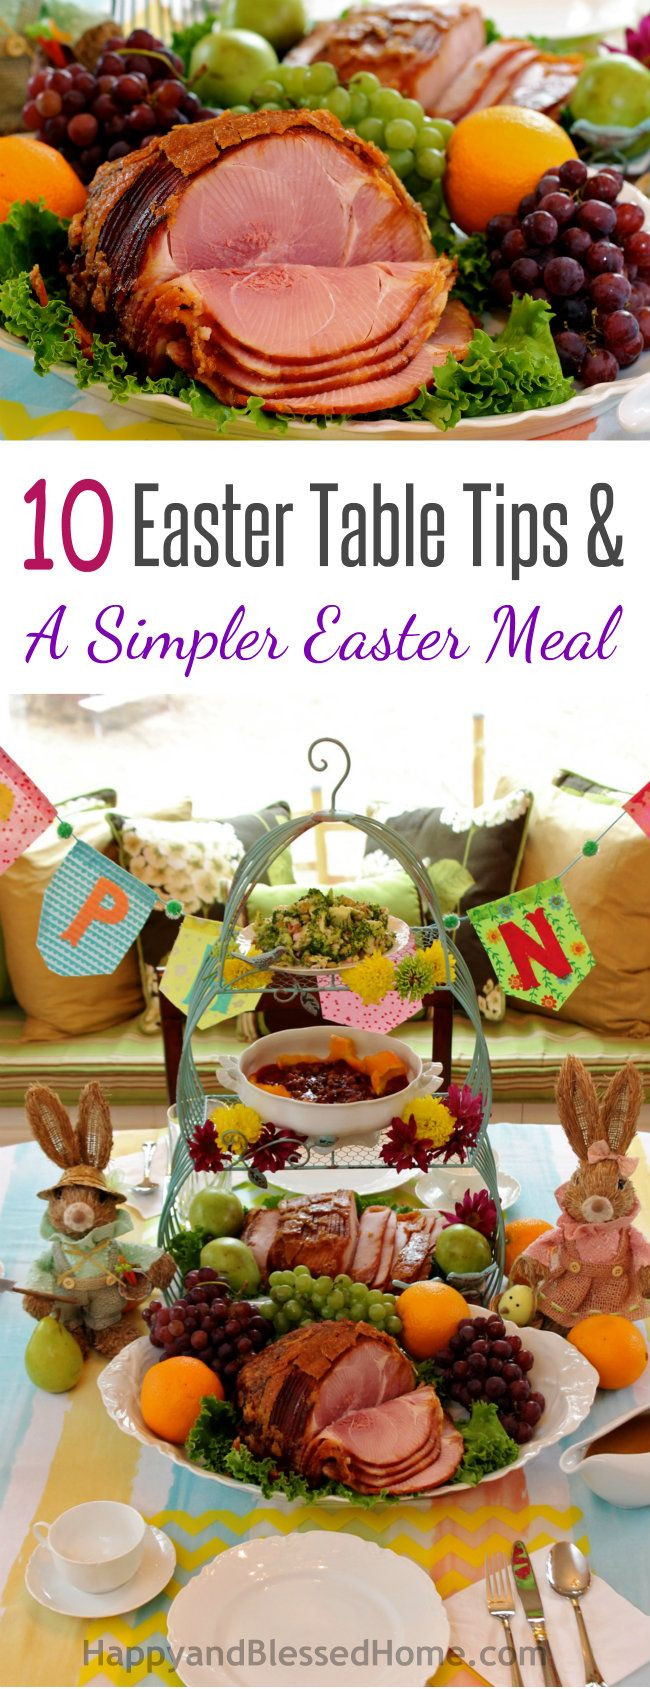 Whole Foods Easter Ham
 10 Easter Table Tips and a Simpler Easter Meal